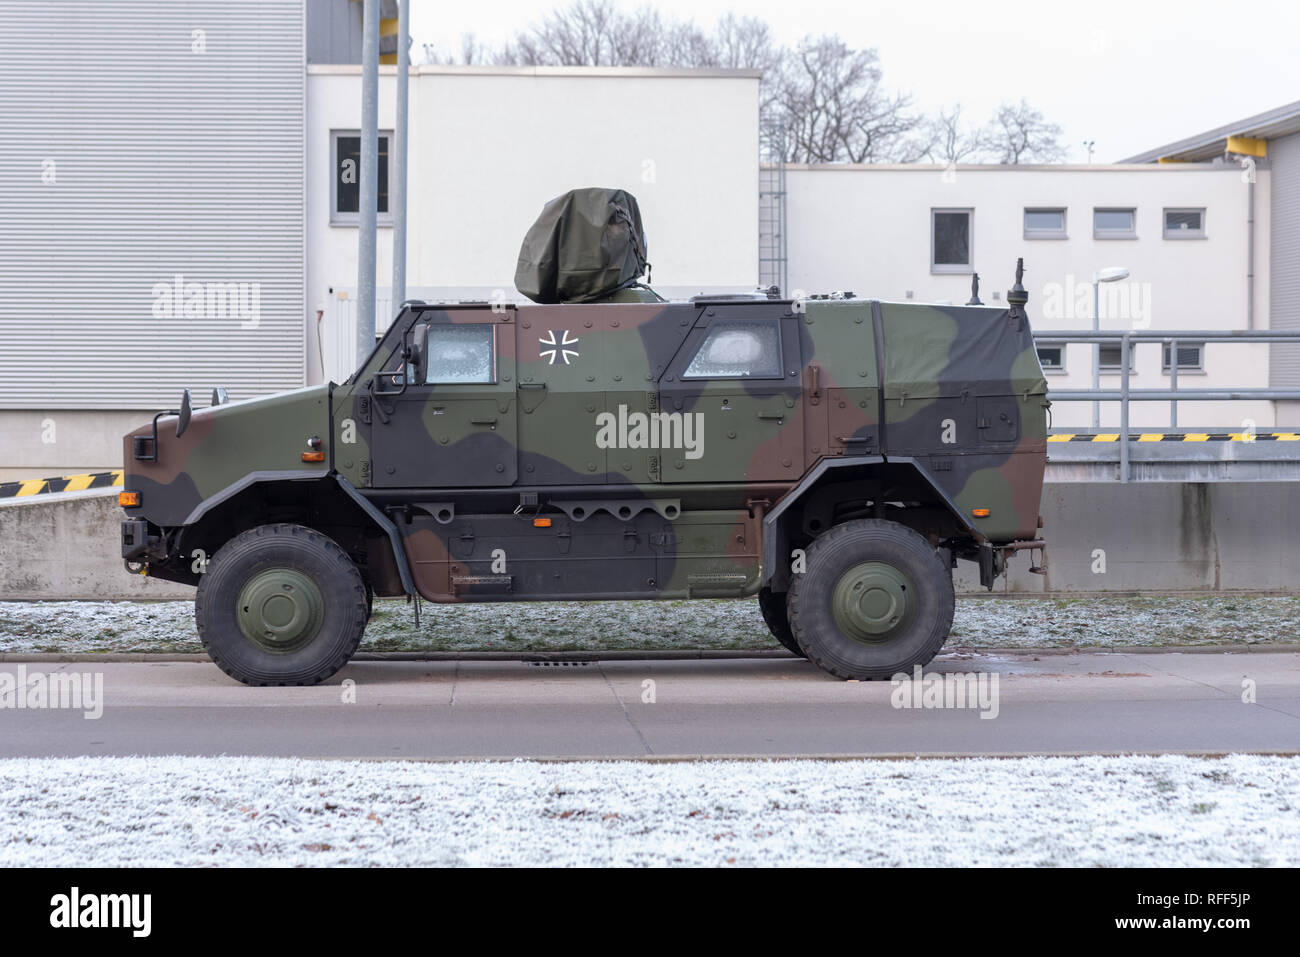 View of a protected convoy and patrol vehicle of the German Federal Armed Forces, type Dingo 1, parked at the roadside. Stock Photo